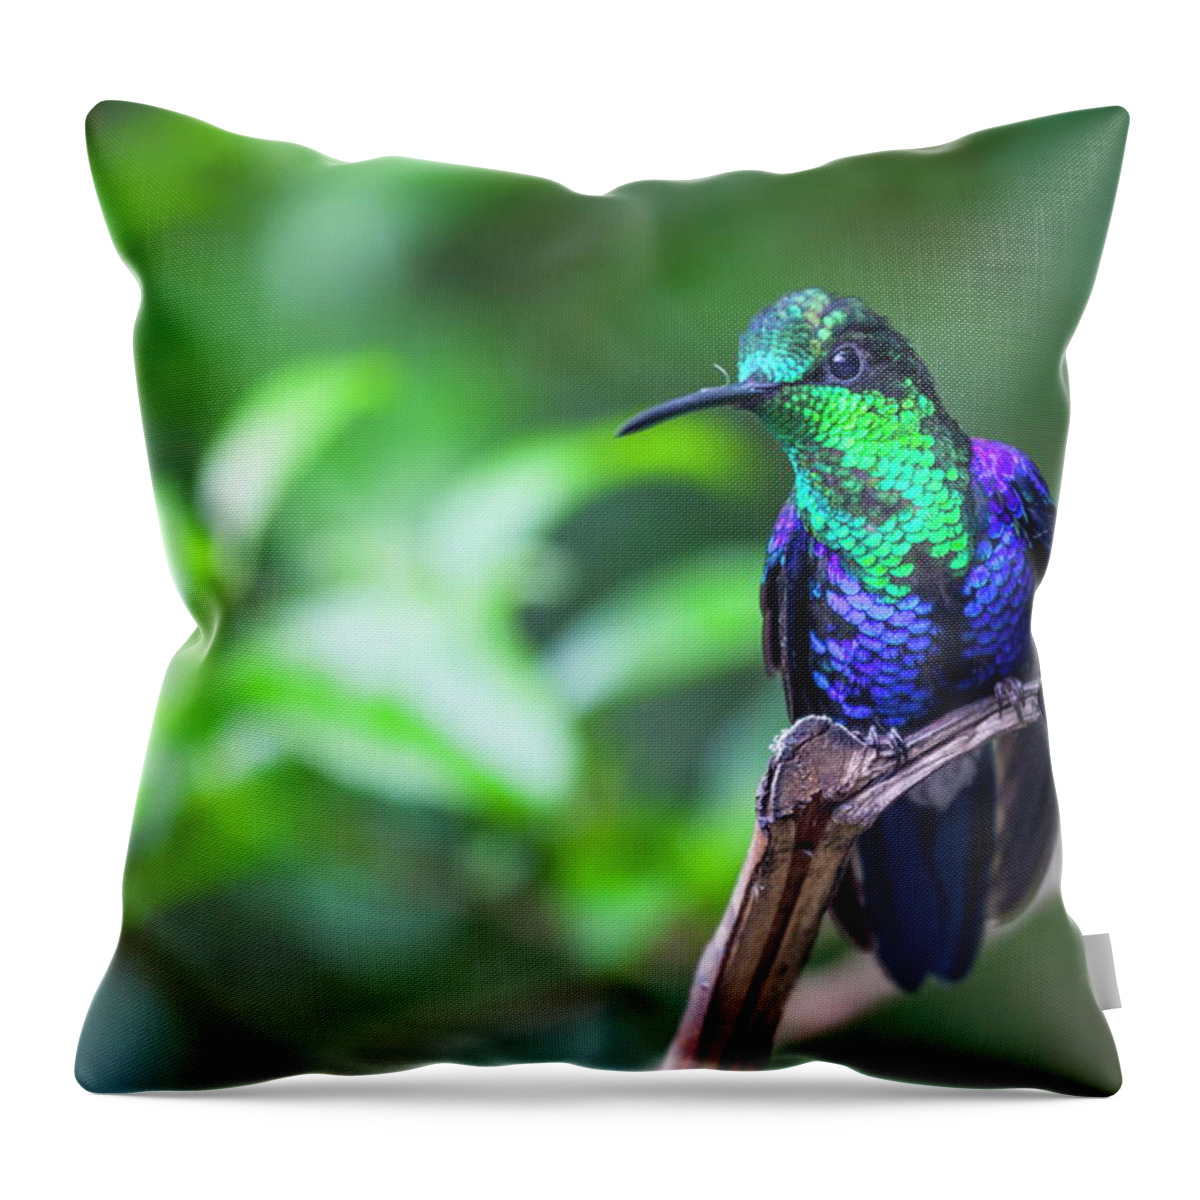 Estock Throw Pillow featuring the digital art Green-crowned Woodnymph Bird by Timo Bierbaum